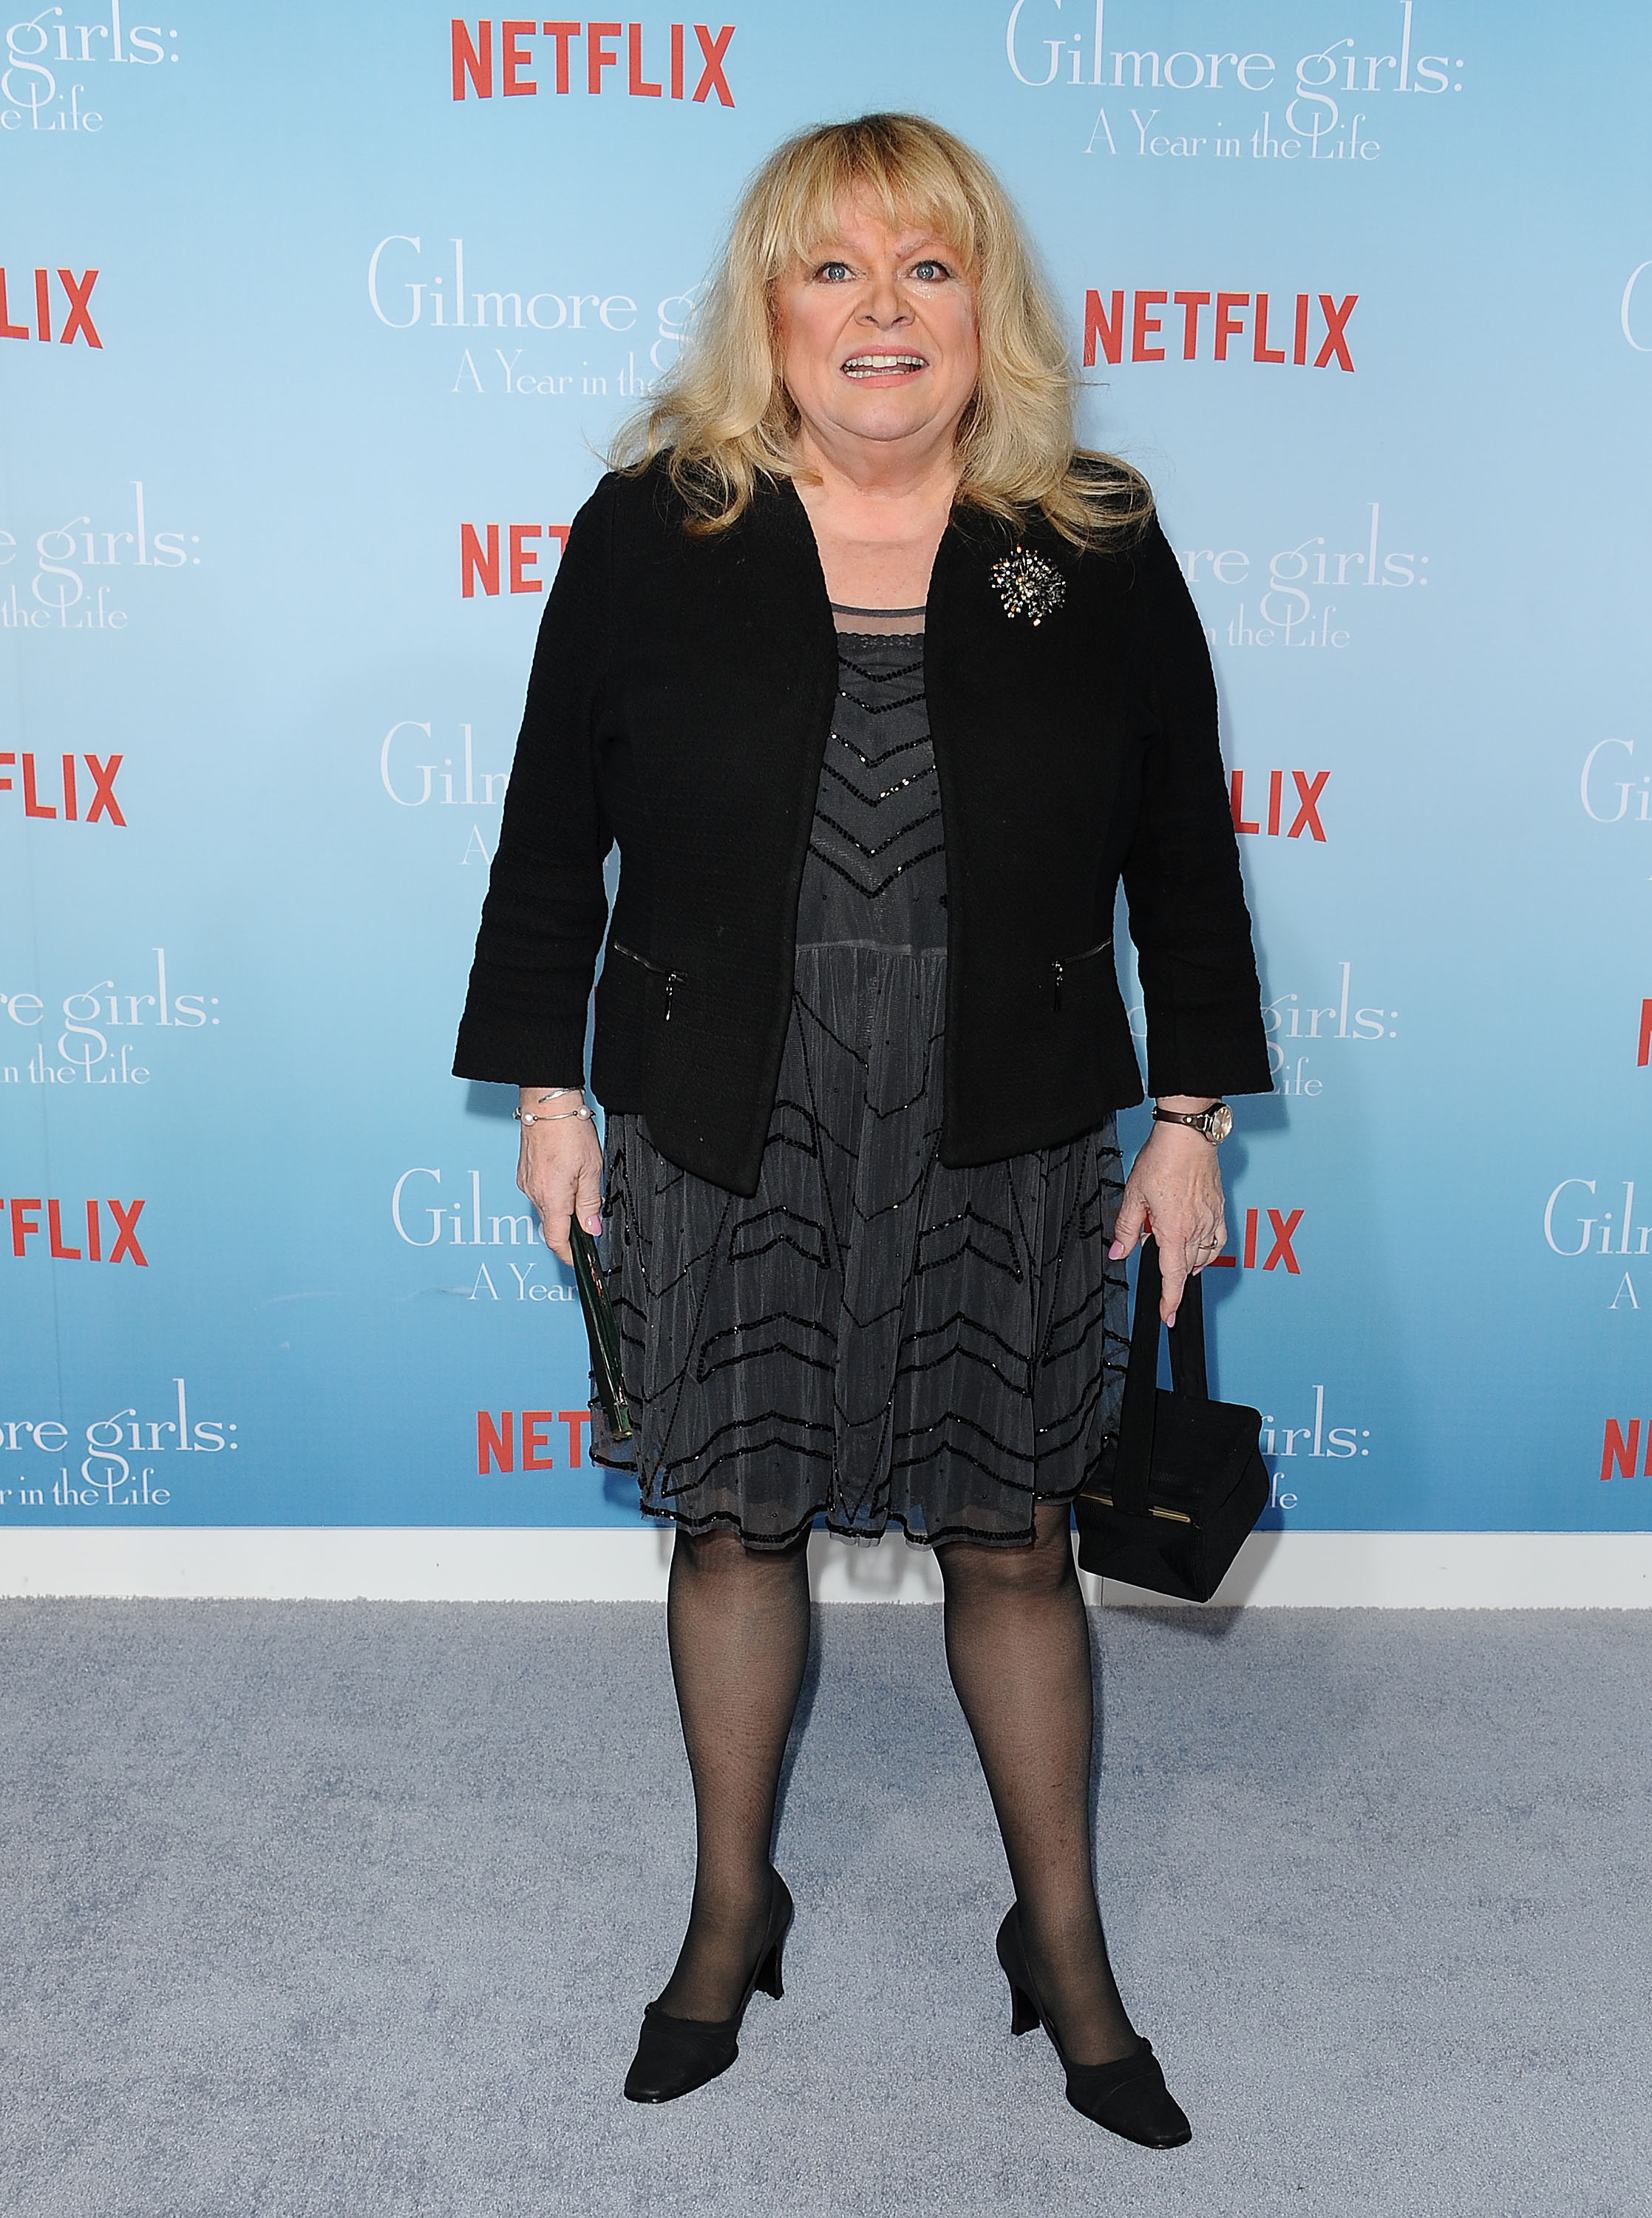 Sally Struthers at the premiere of "Gilmore Girls: A Year in the Life" in 2016 | Source: Getty Images